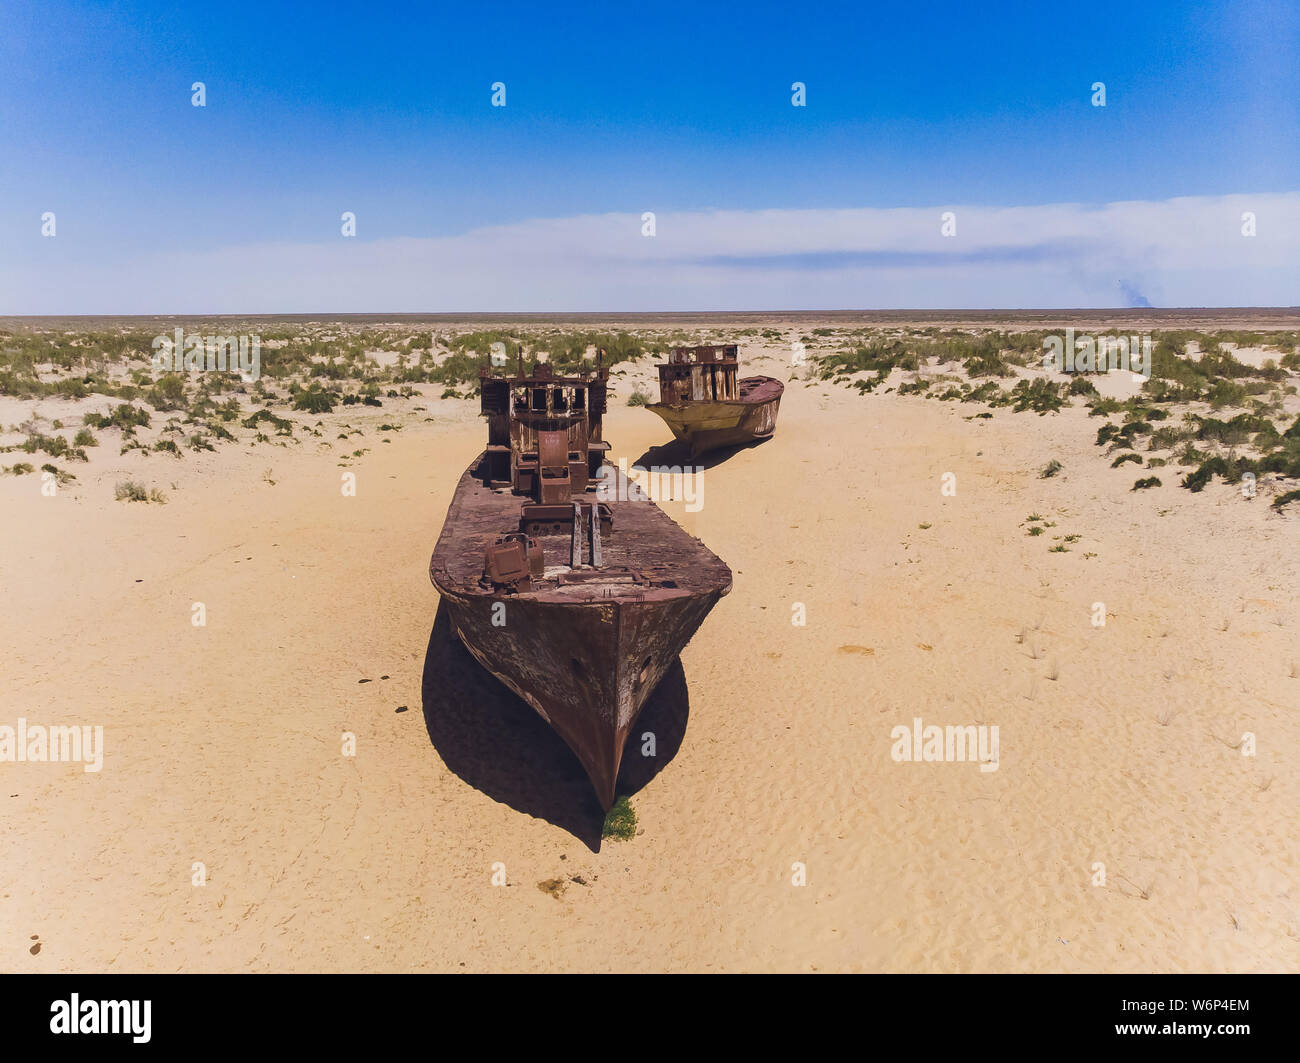 NUKUS, UZBEKISTAN - MAY 1, 2019: Real model of former sea boat on a pedestal as monument of passed days when Mo'ynoq was an active sea port on Aral Stock Photo